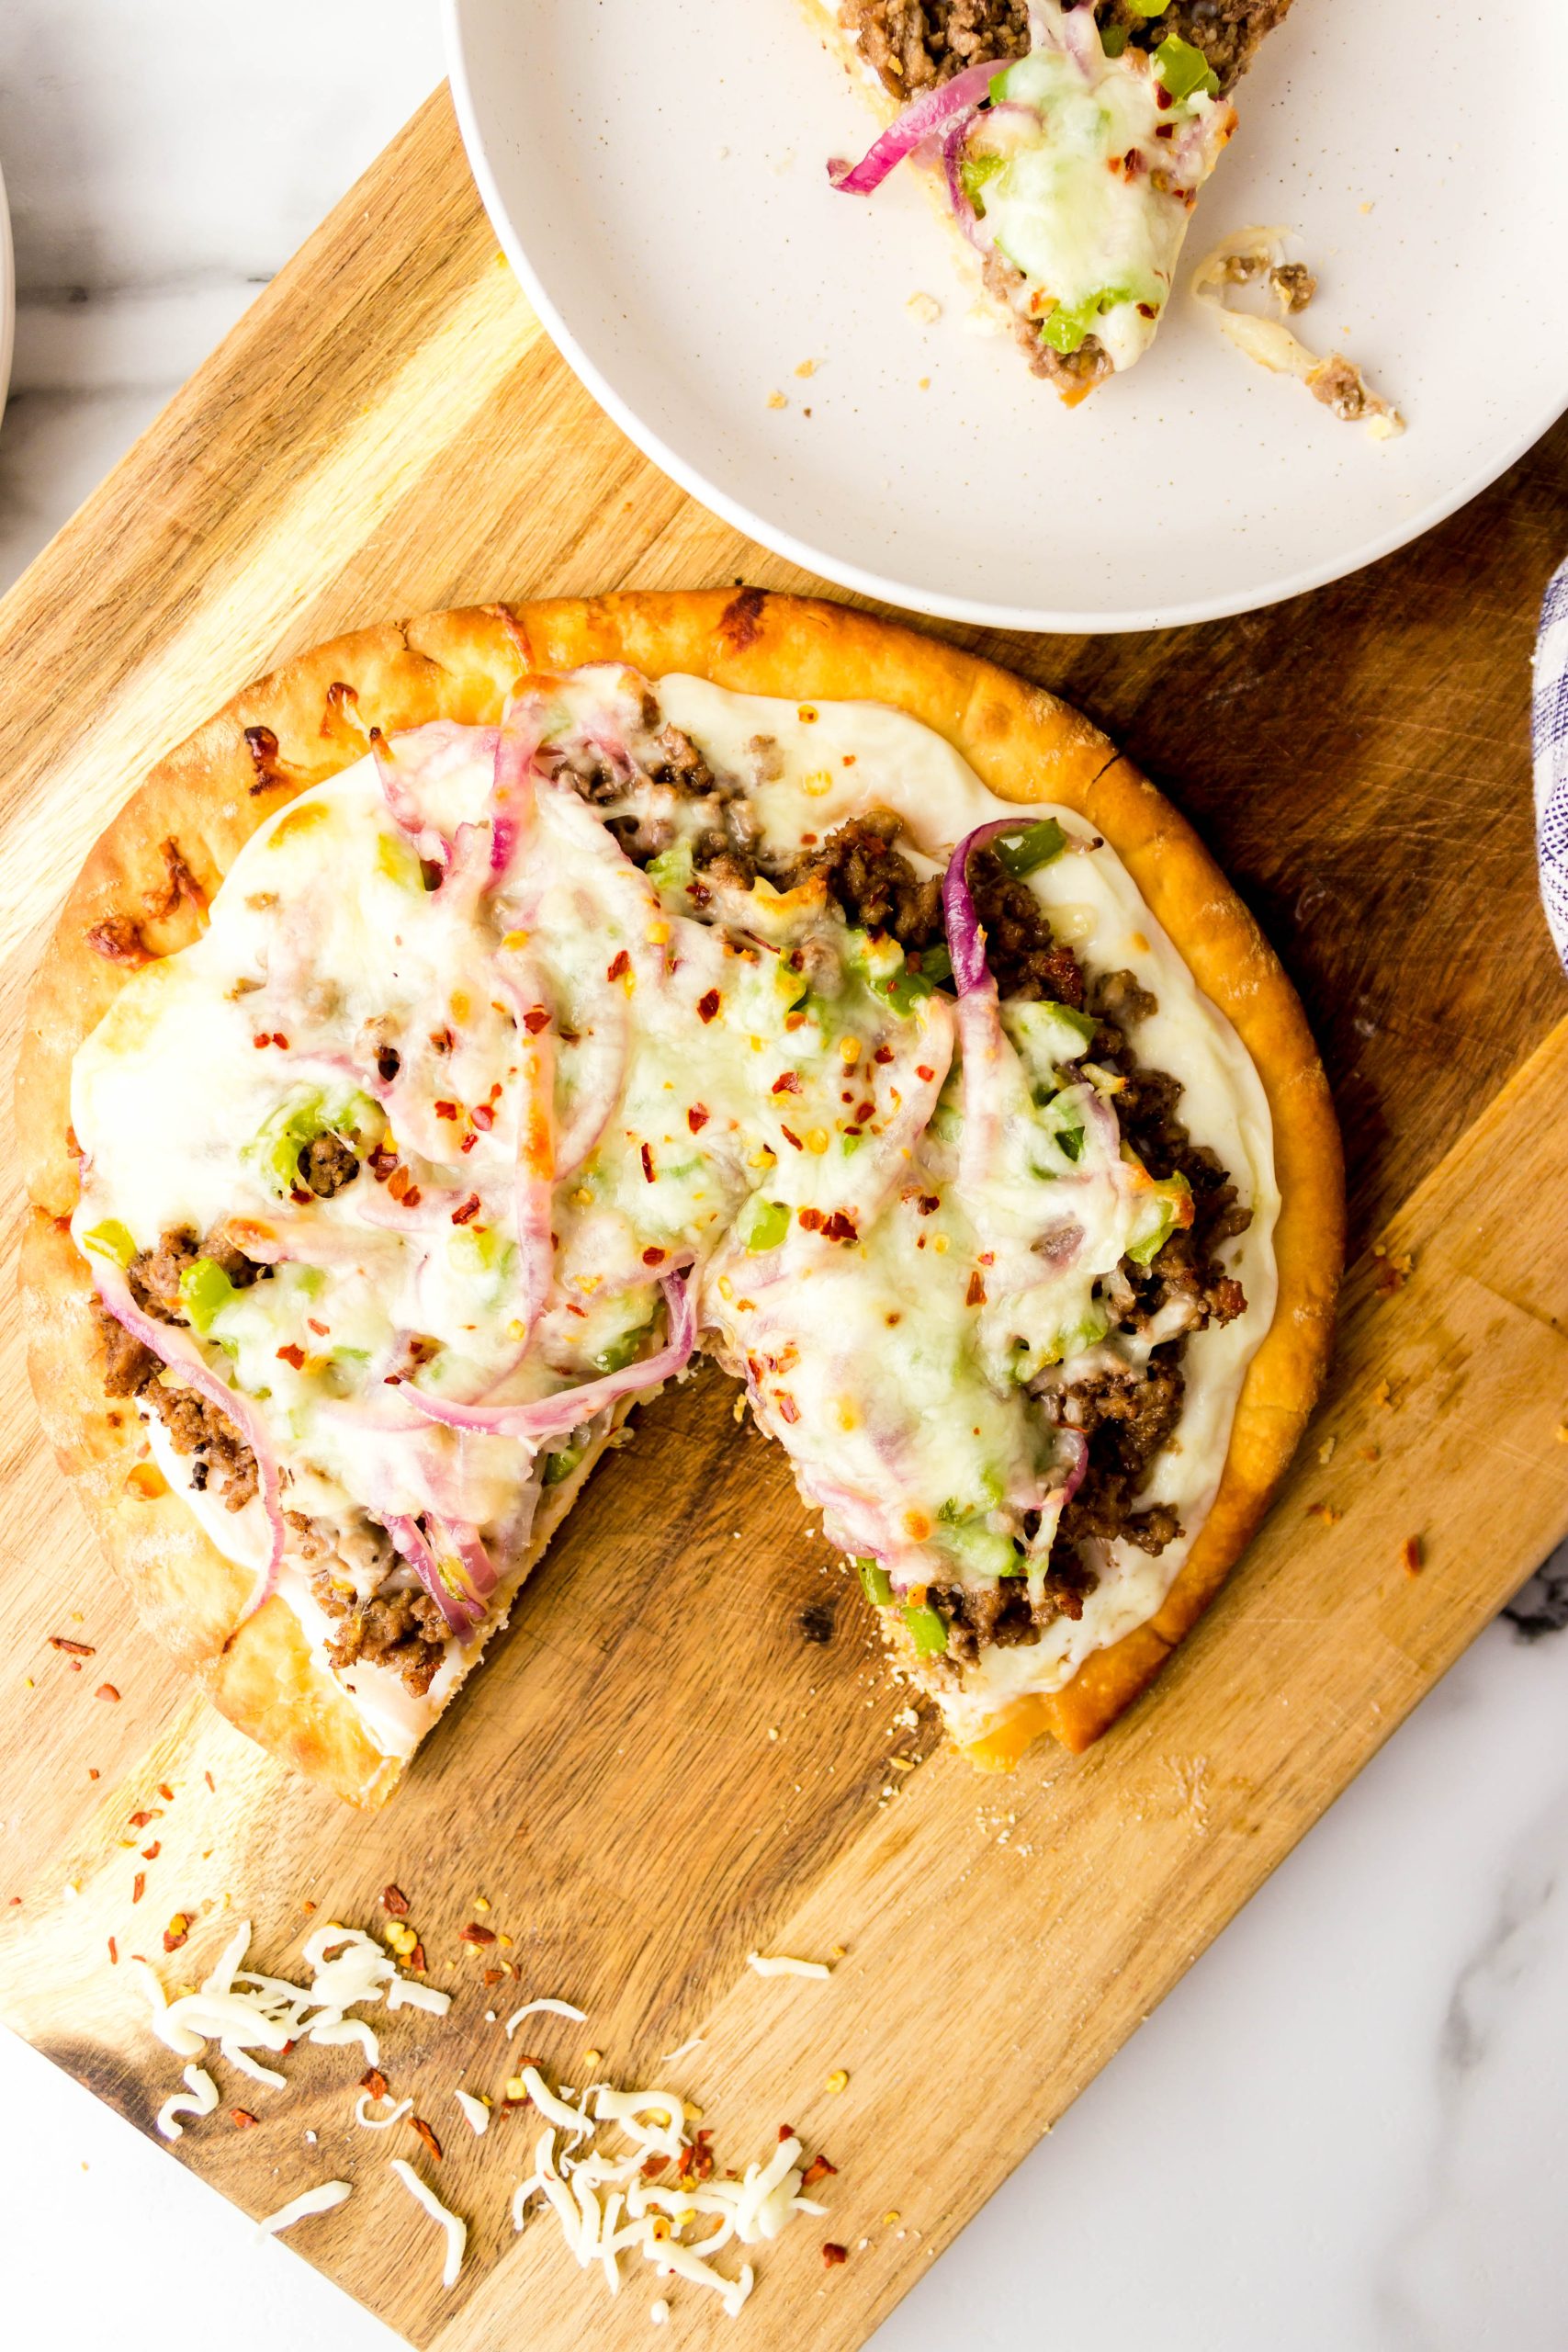 Ground beef pizza on a wooden board